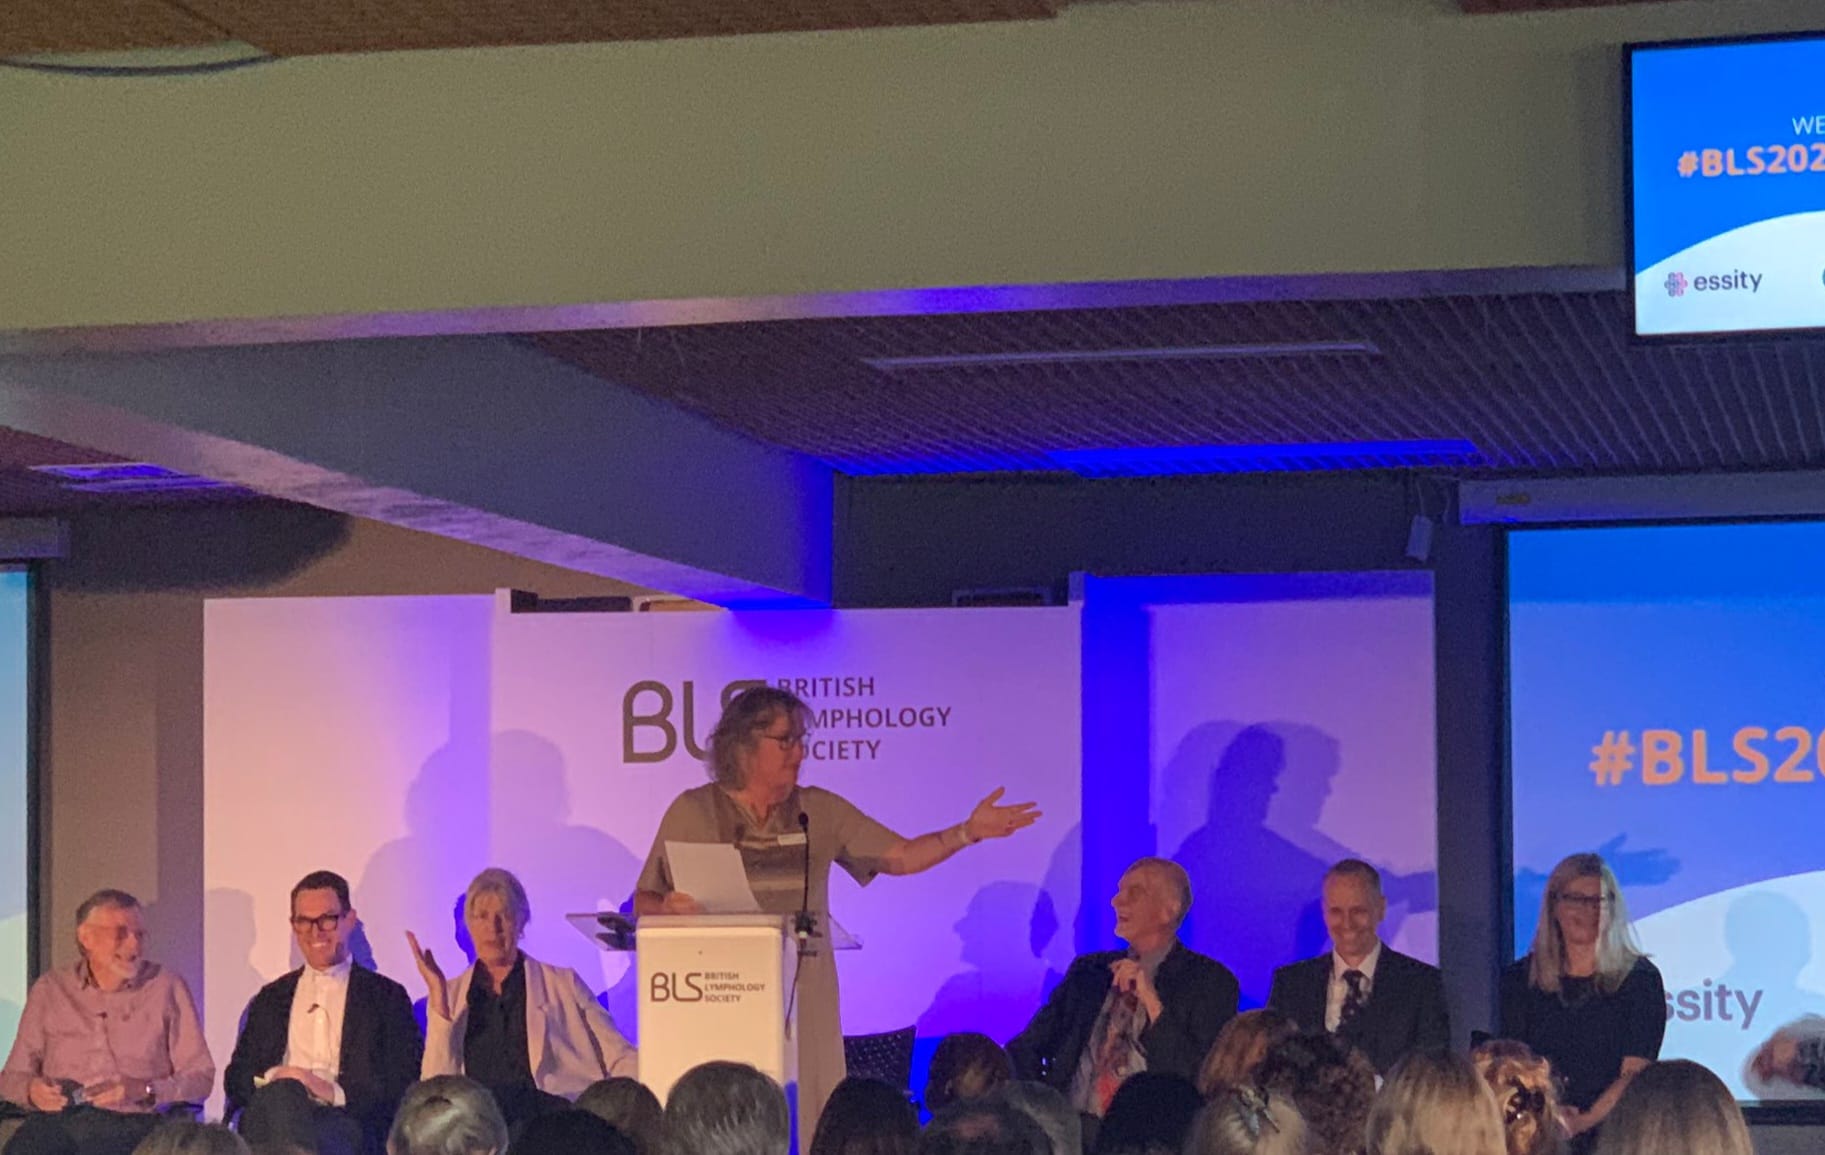 Highlights of The British Lymphology Society (BLS) Annual Conference 2022 - By Gaynor Leech, Lymphoedema Patient Advocate and Founder of LWO Community